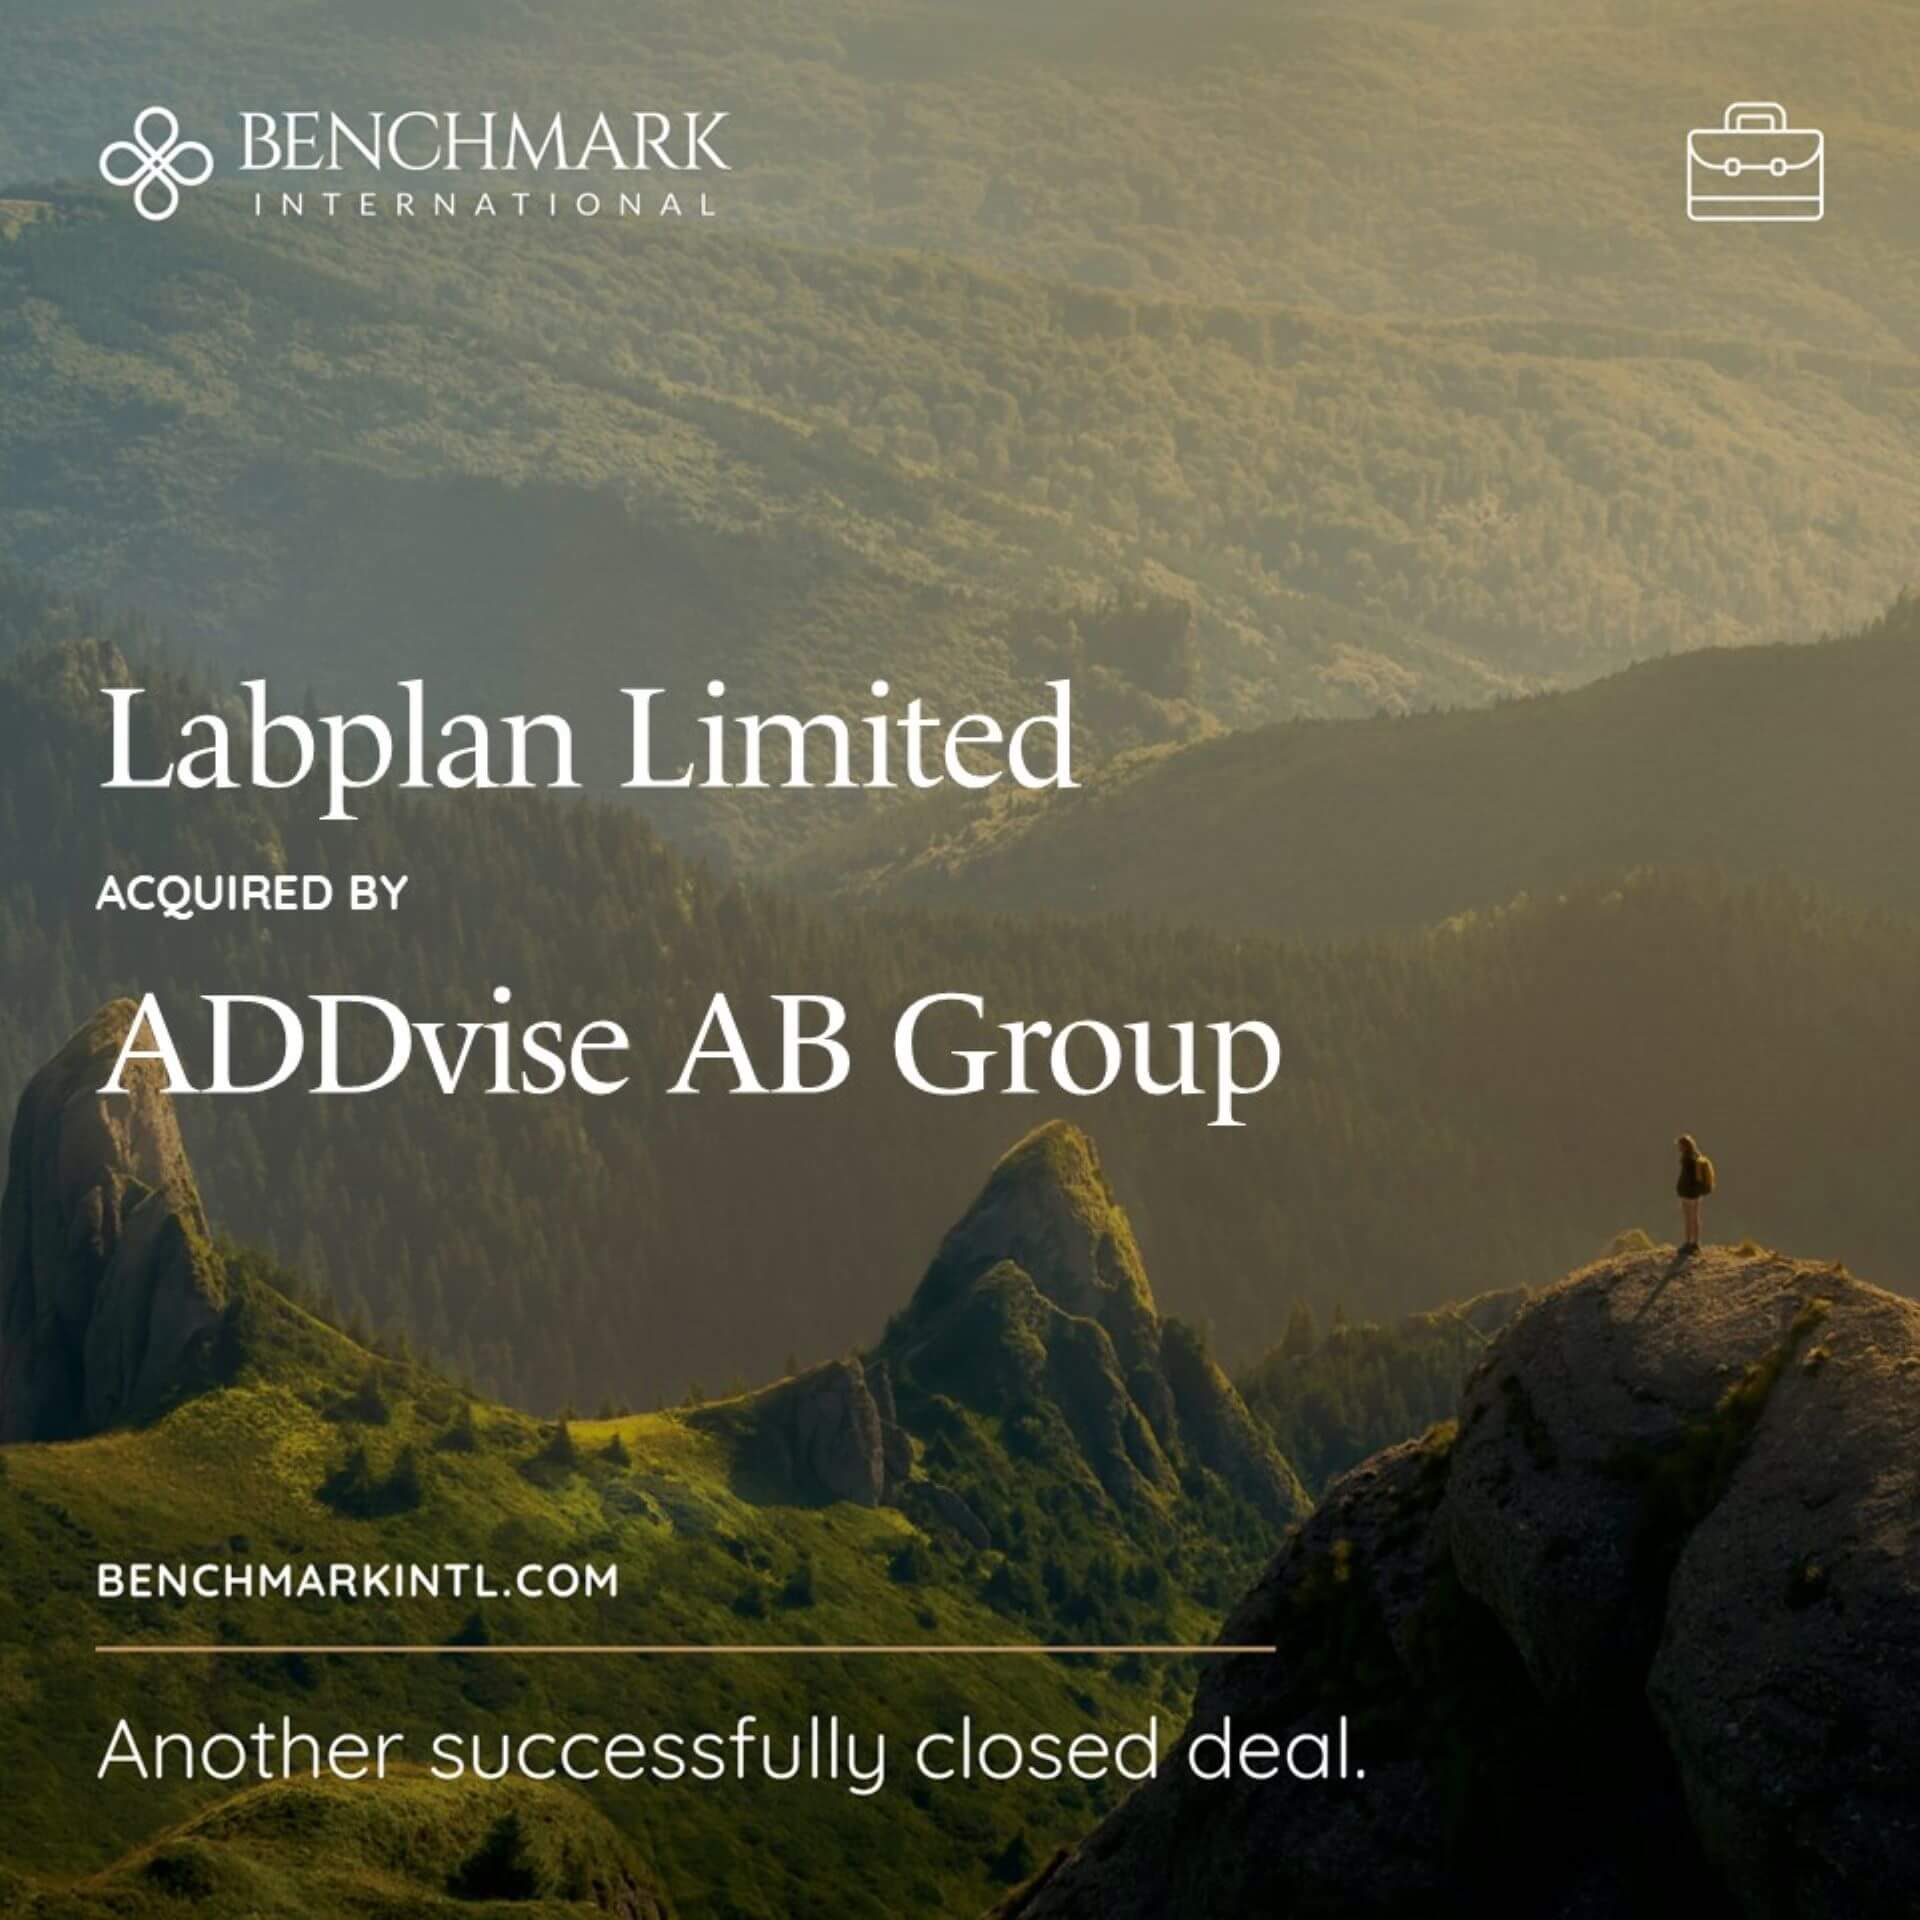 Labplan acquired by ADDvise